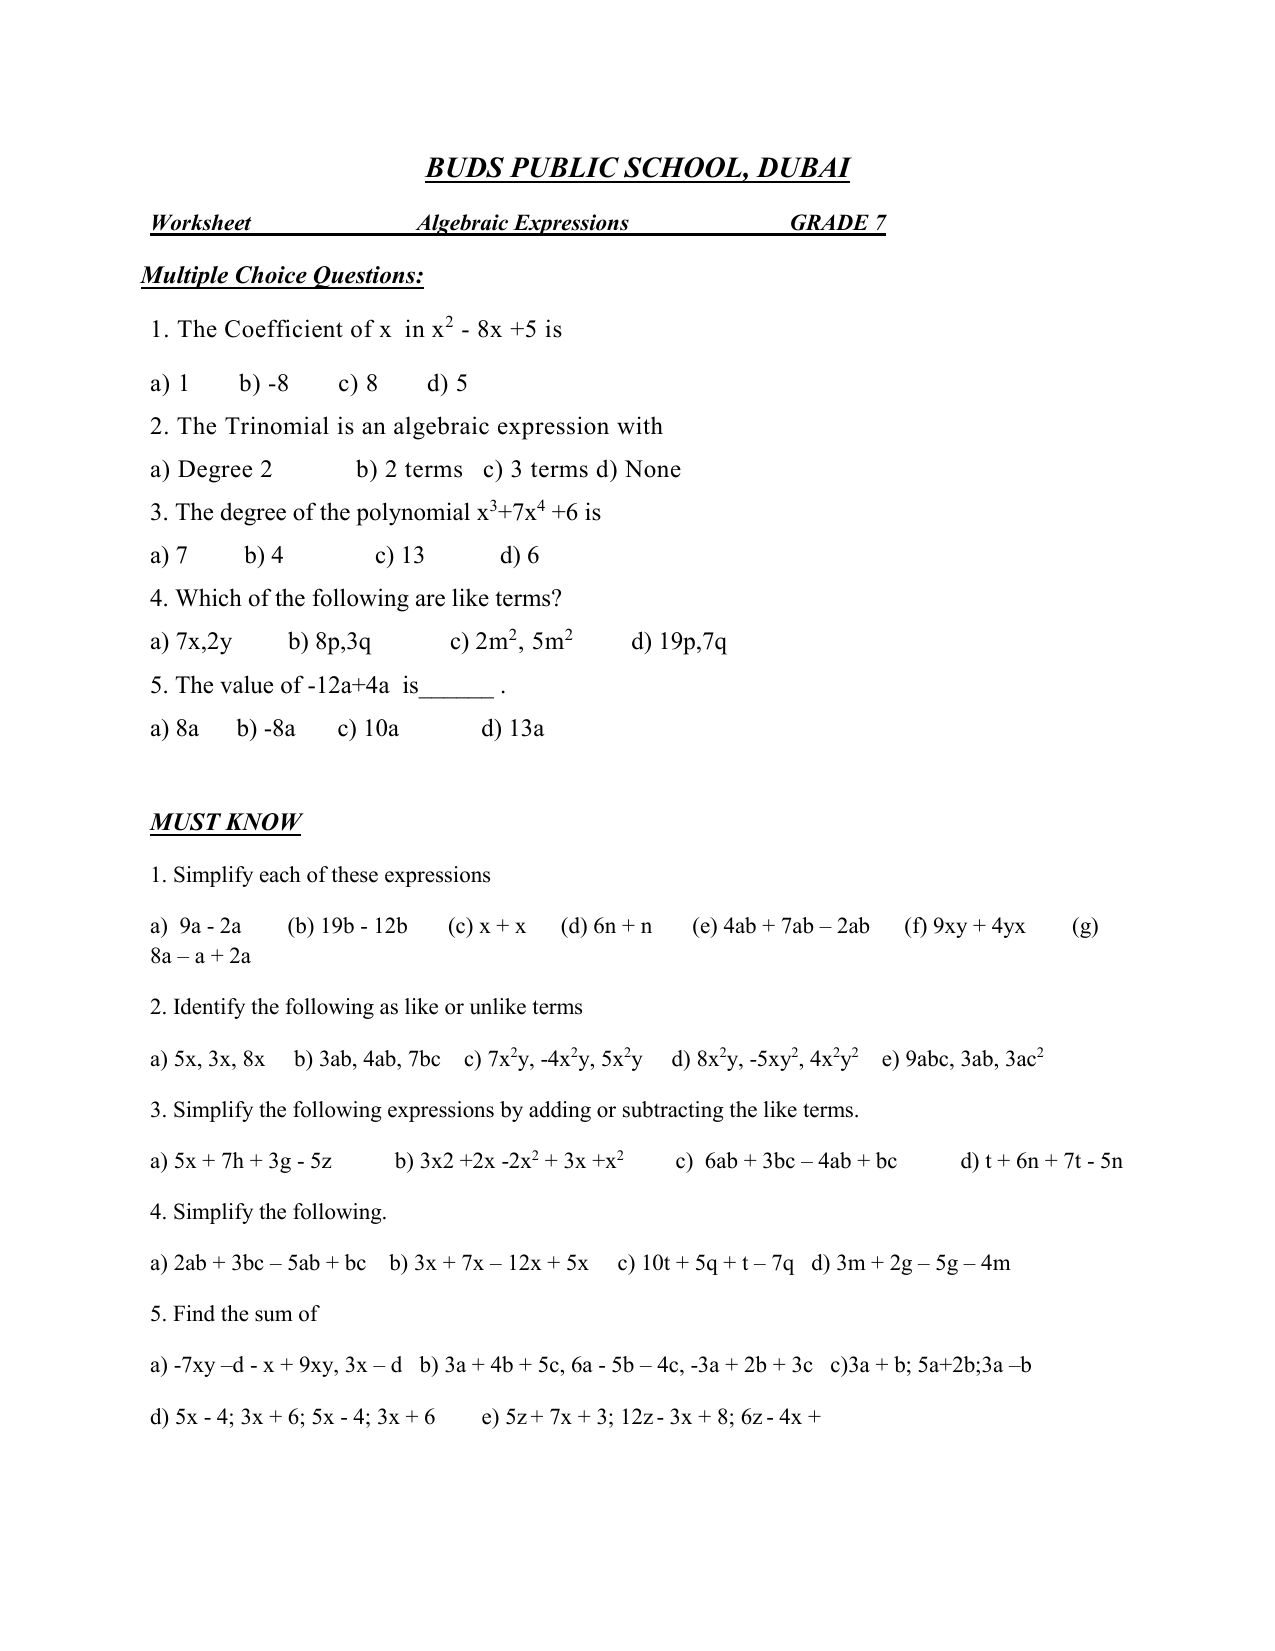 matching-questions-algebraic-expression-grade-7-pdf-learn-vocabulary